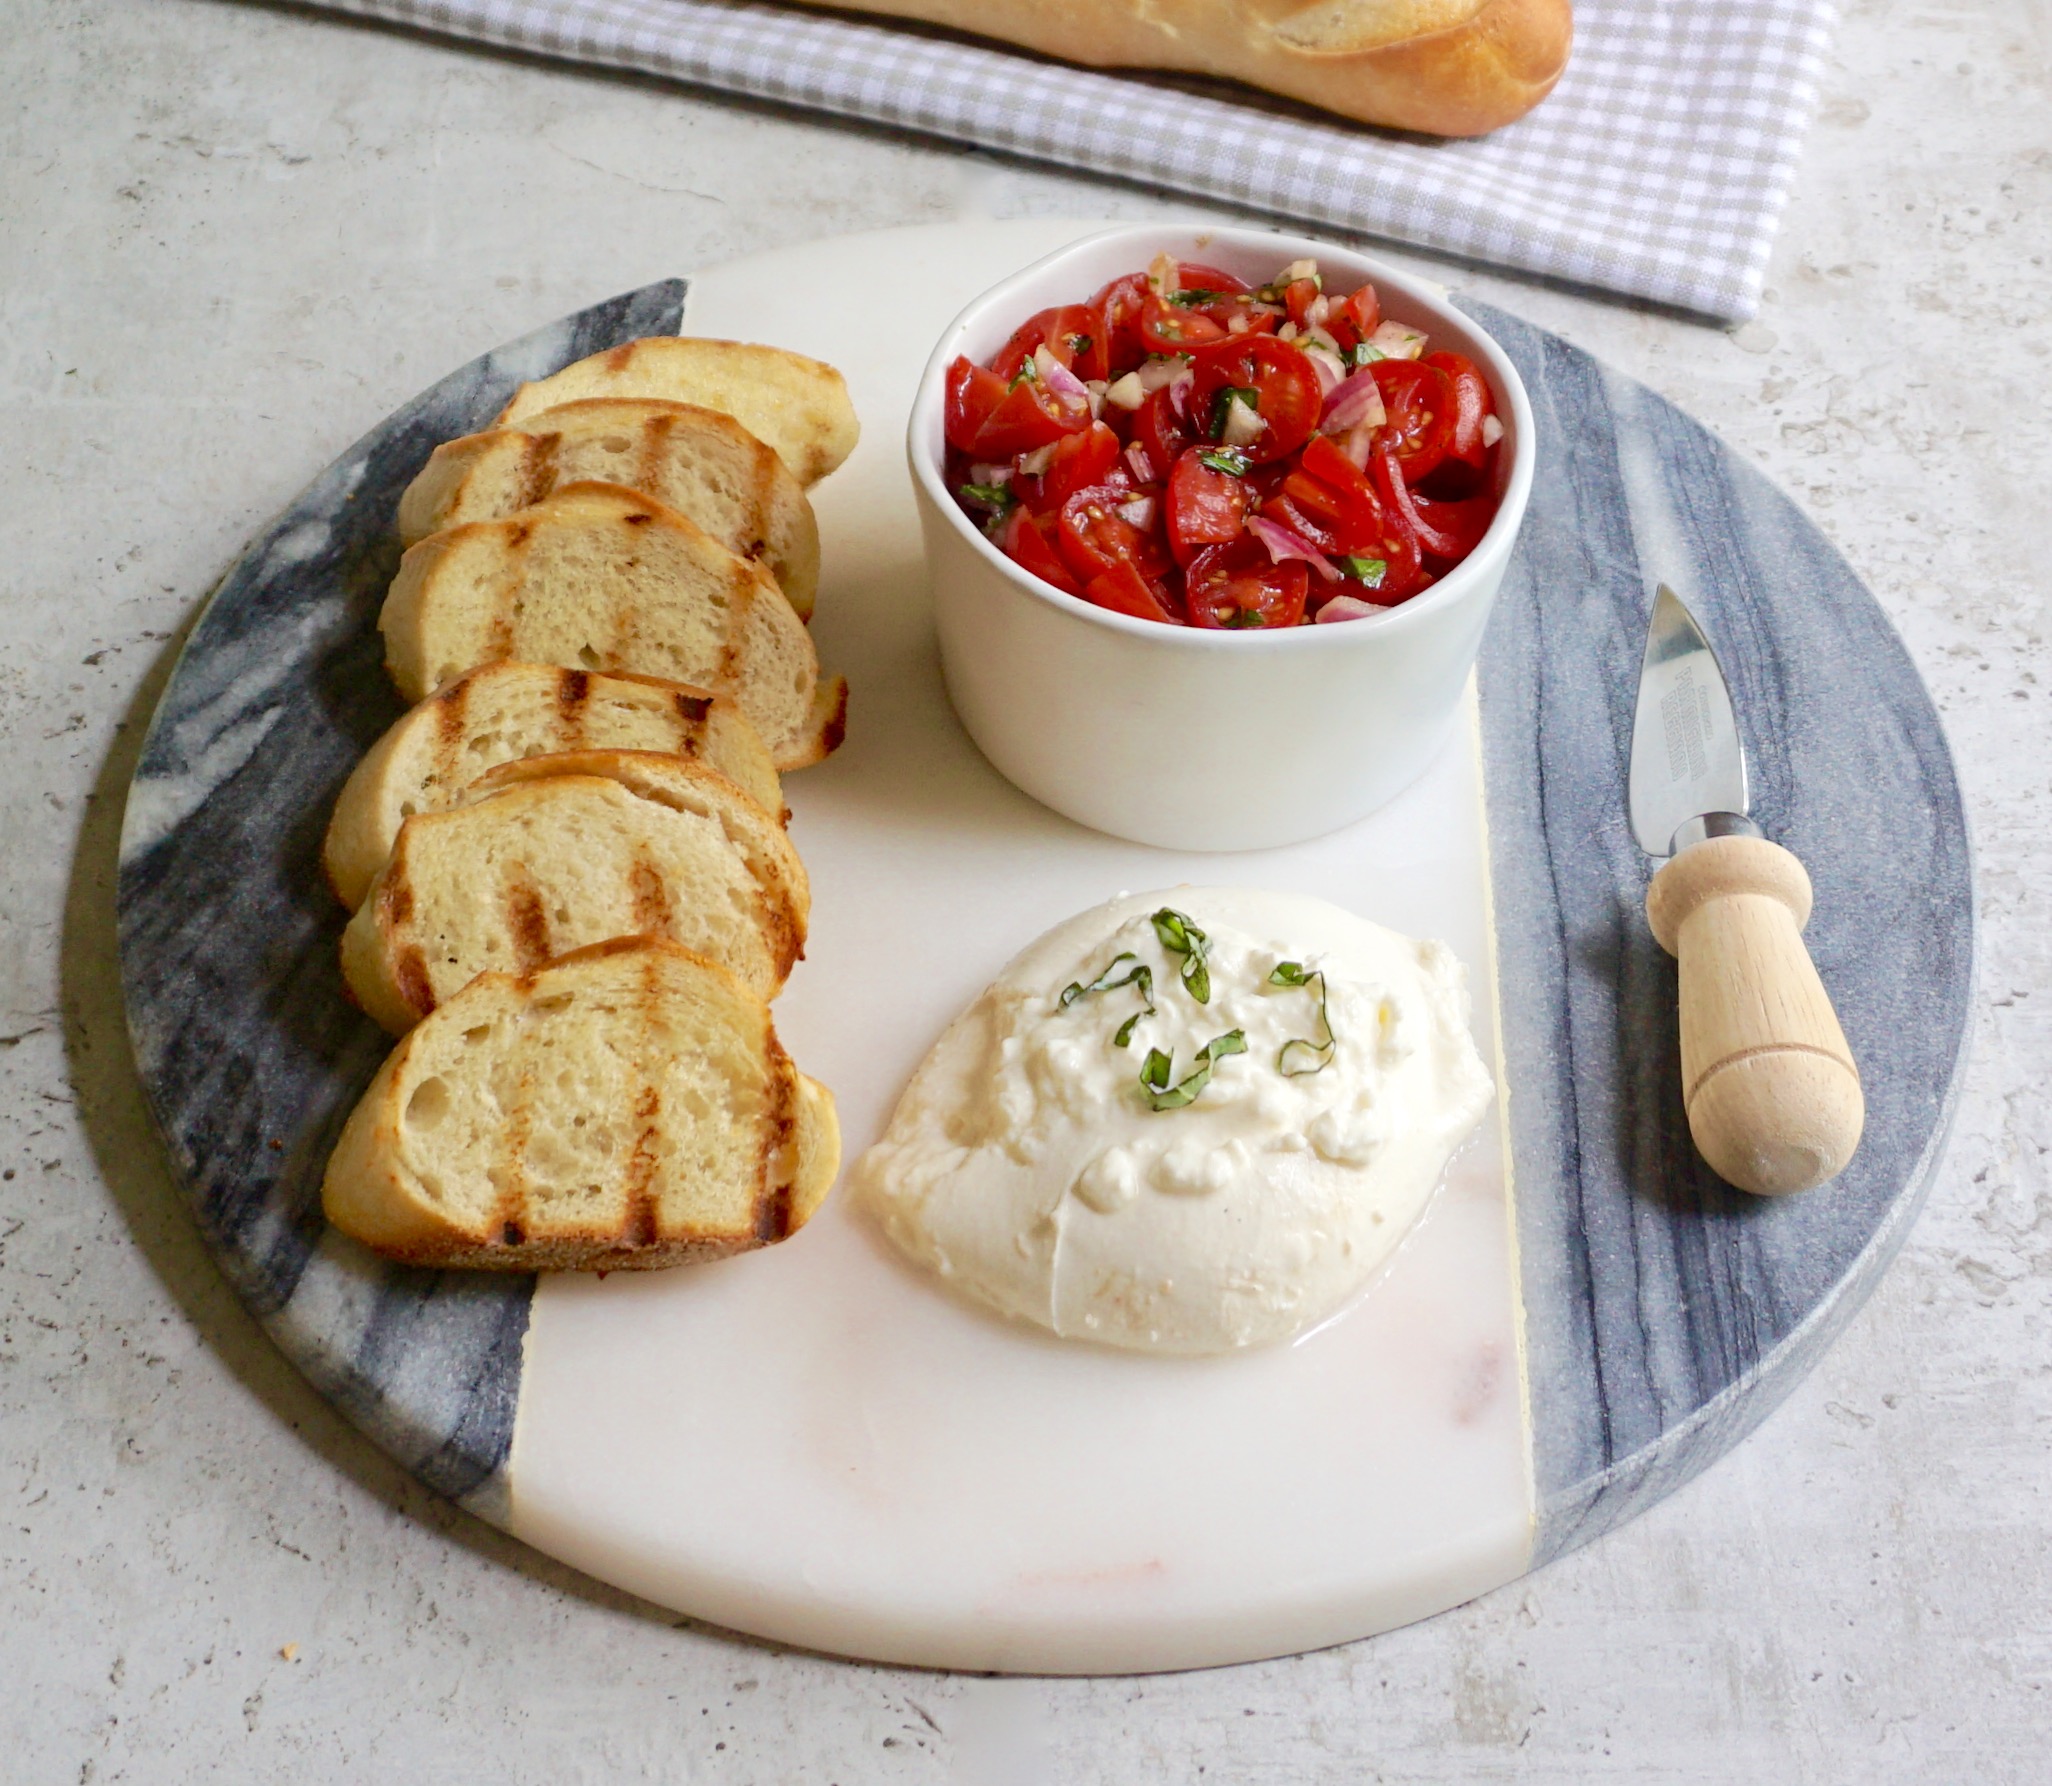 Burrata Bruschetta is a toasted baguette served with burrata tomatoes.